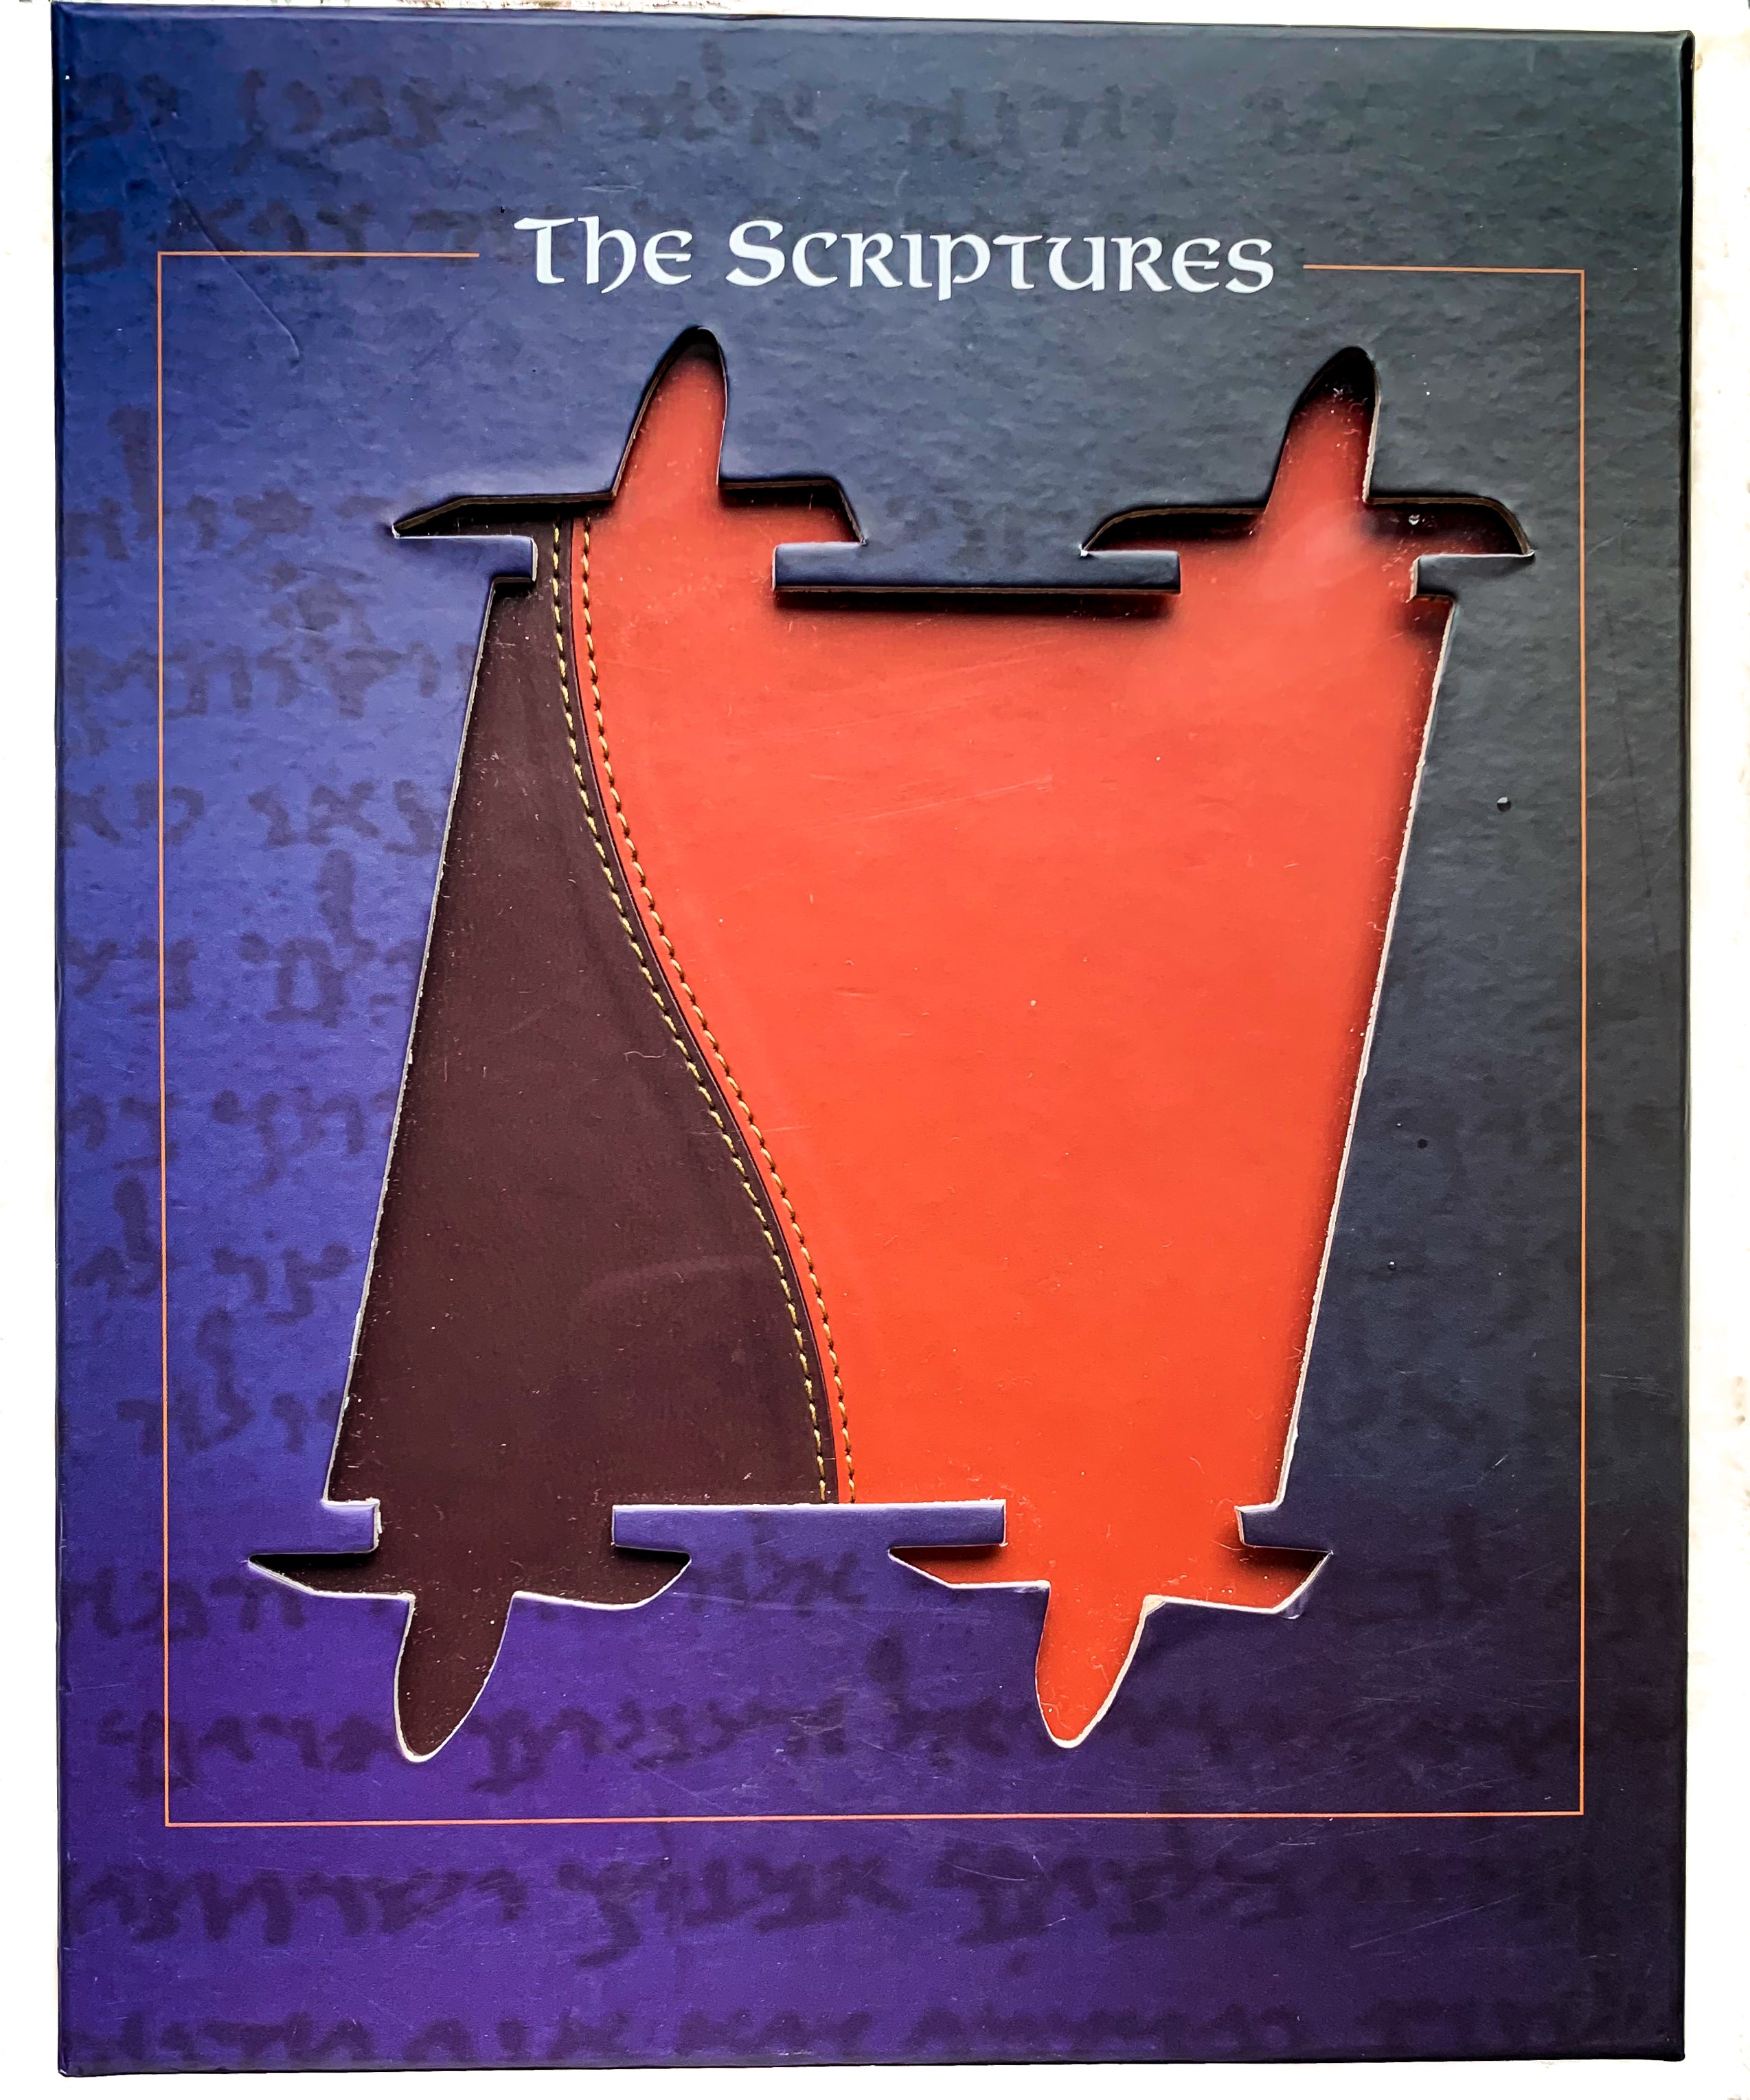 The Scriptures product shot